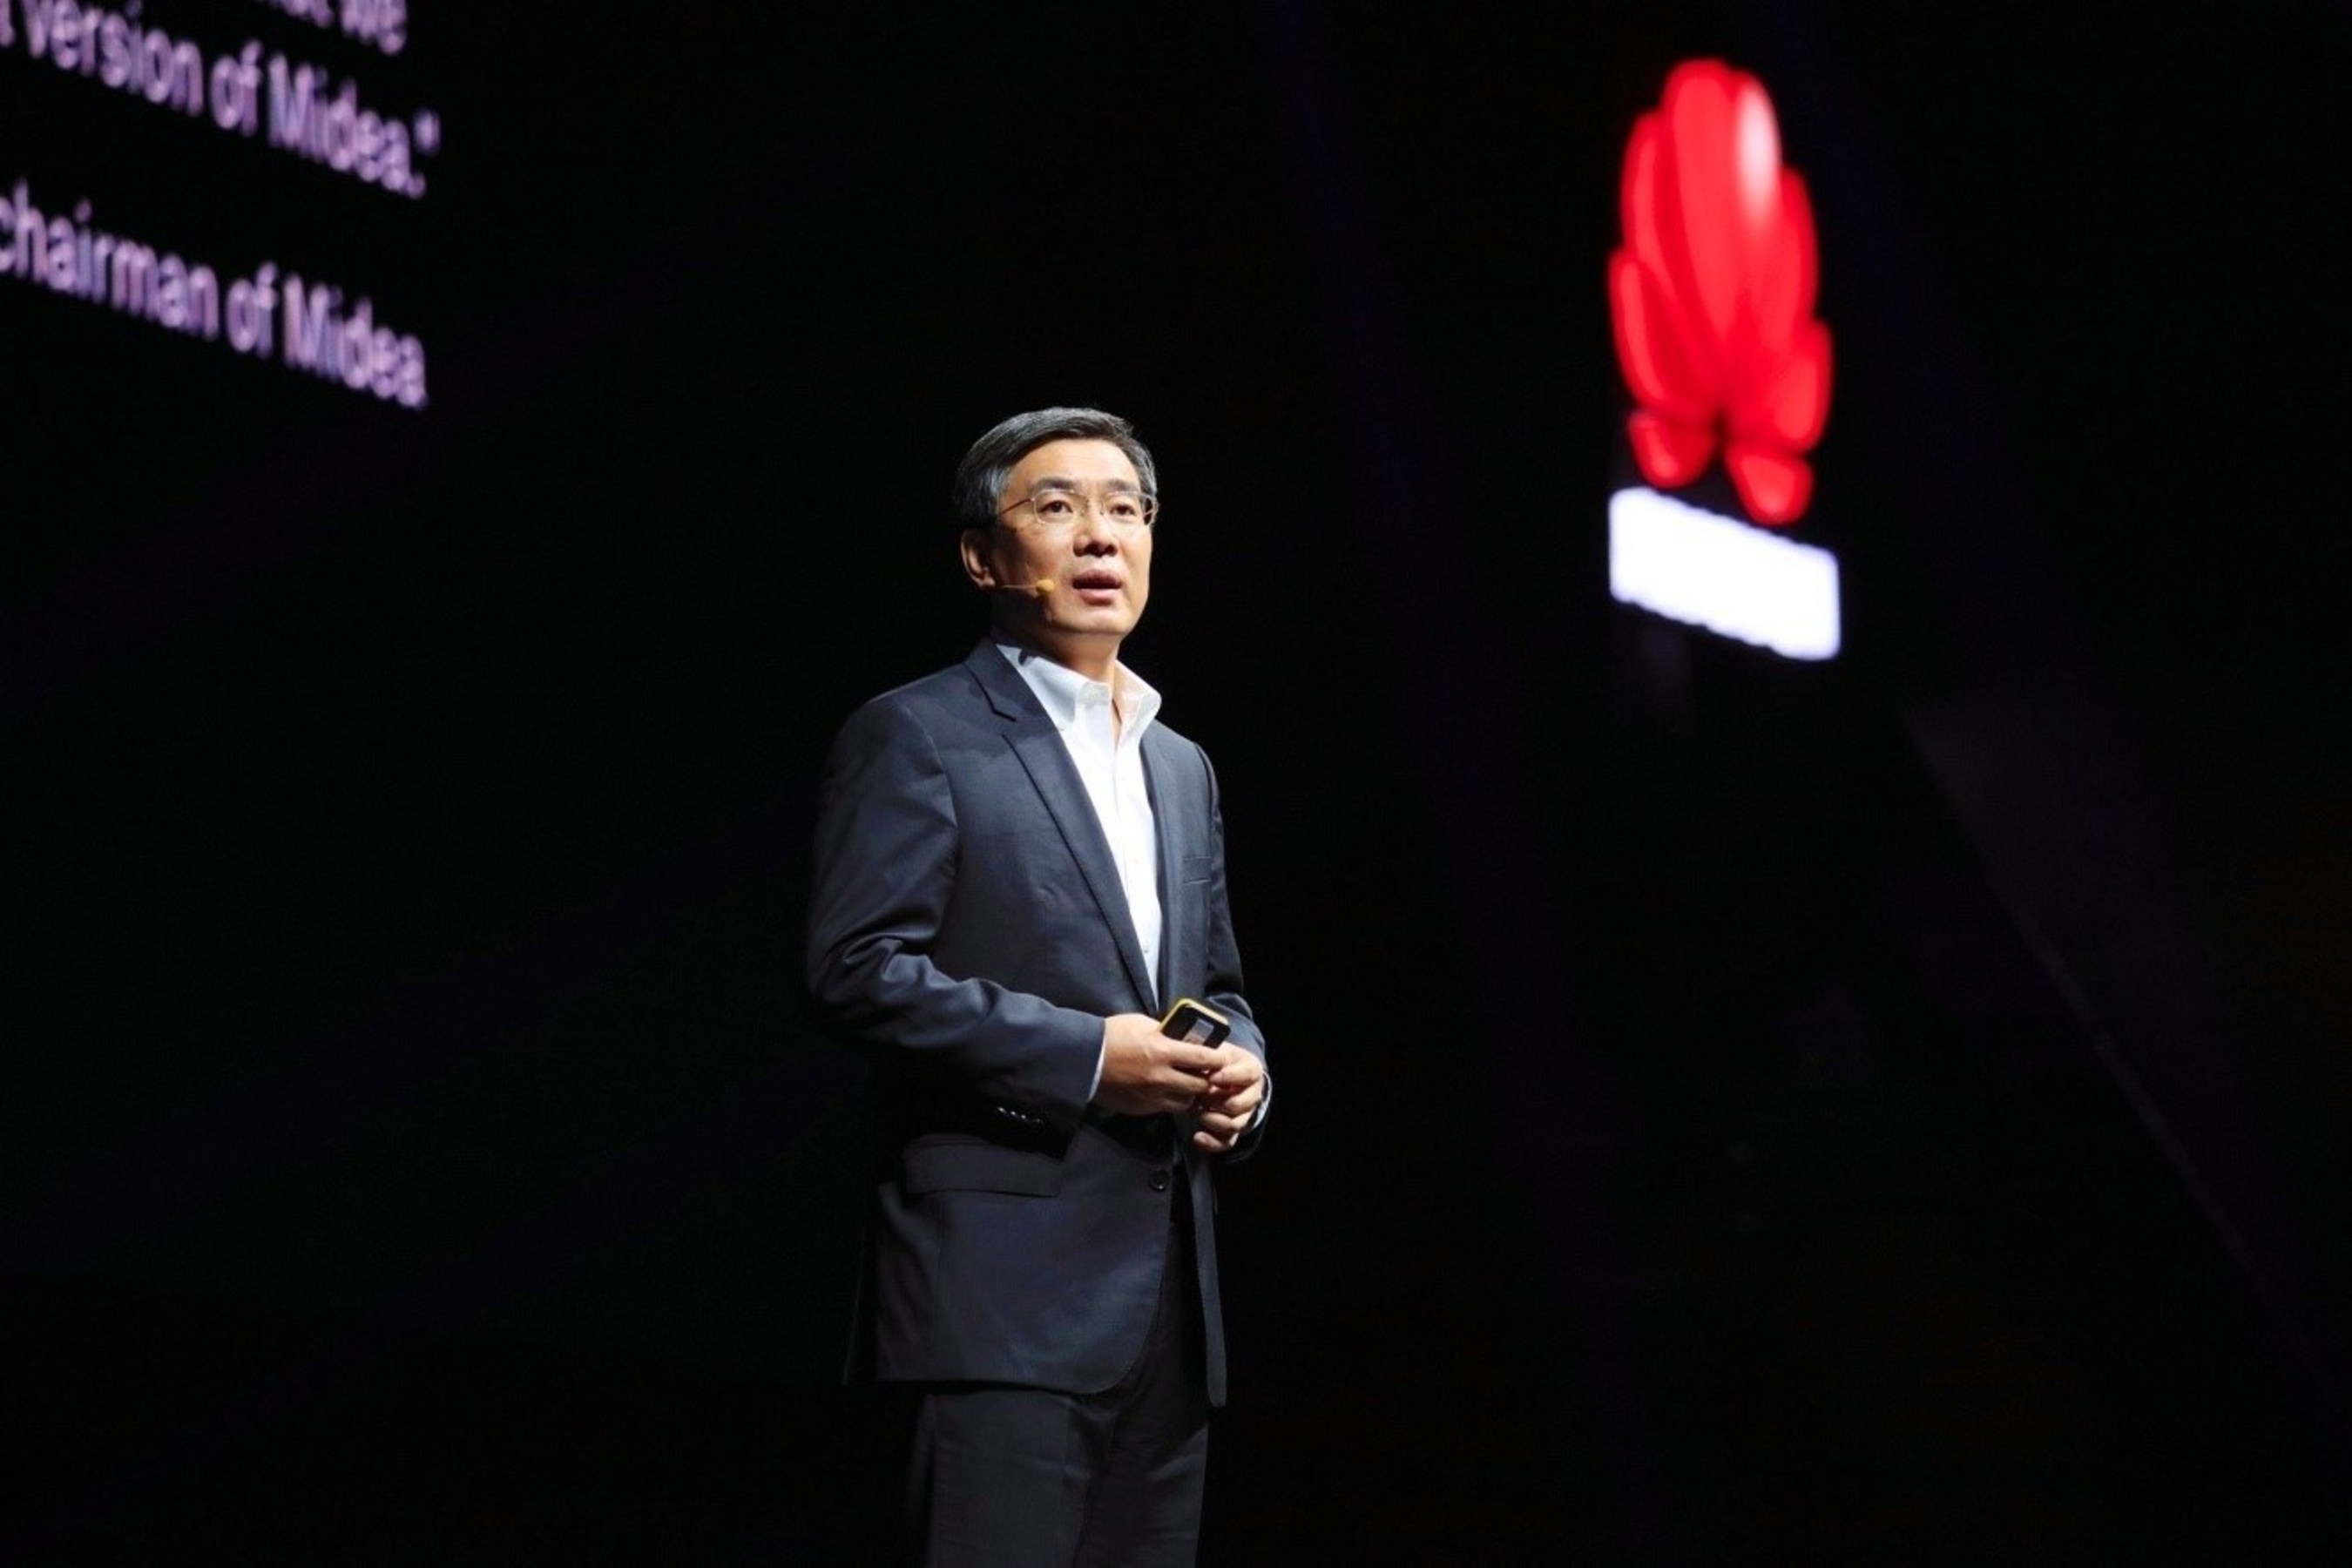 Yan Lida, president of Huawei Enterprise BG, delivers a keynote speech titled "Reinventing Business with Industry Clouds"